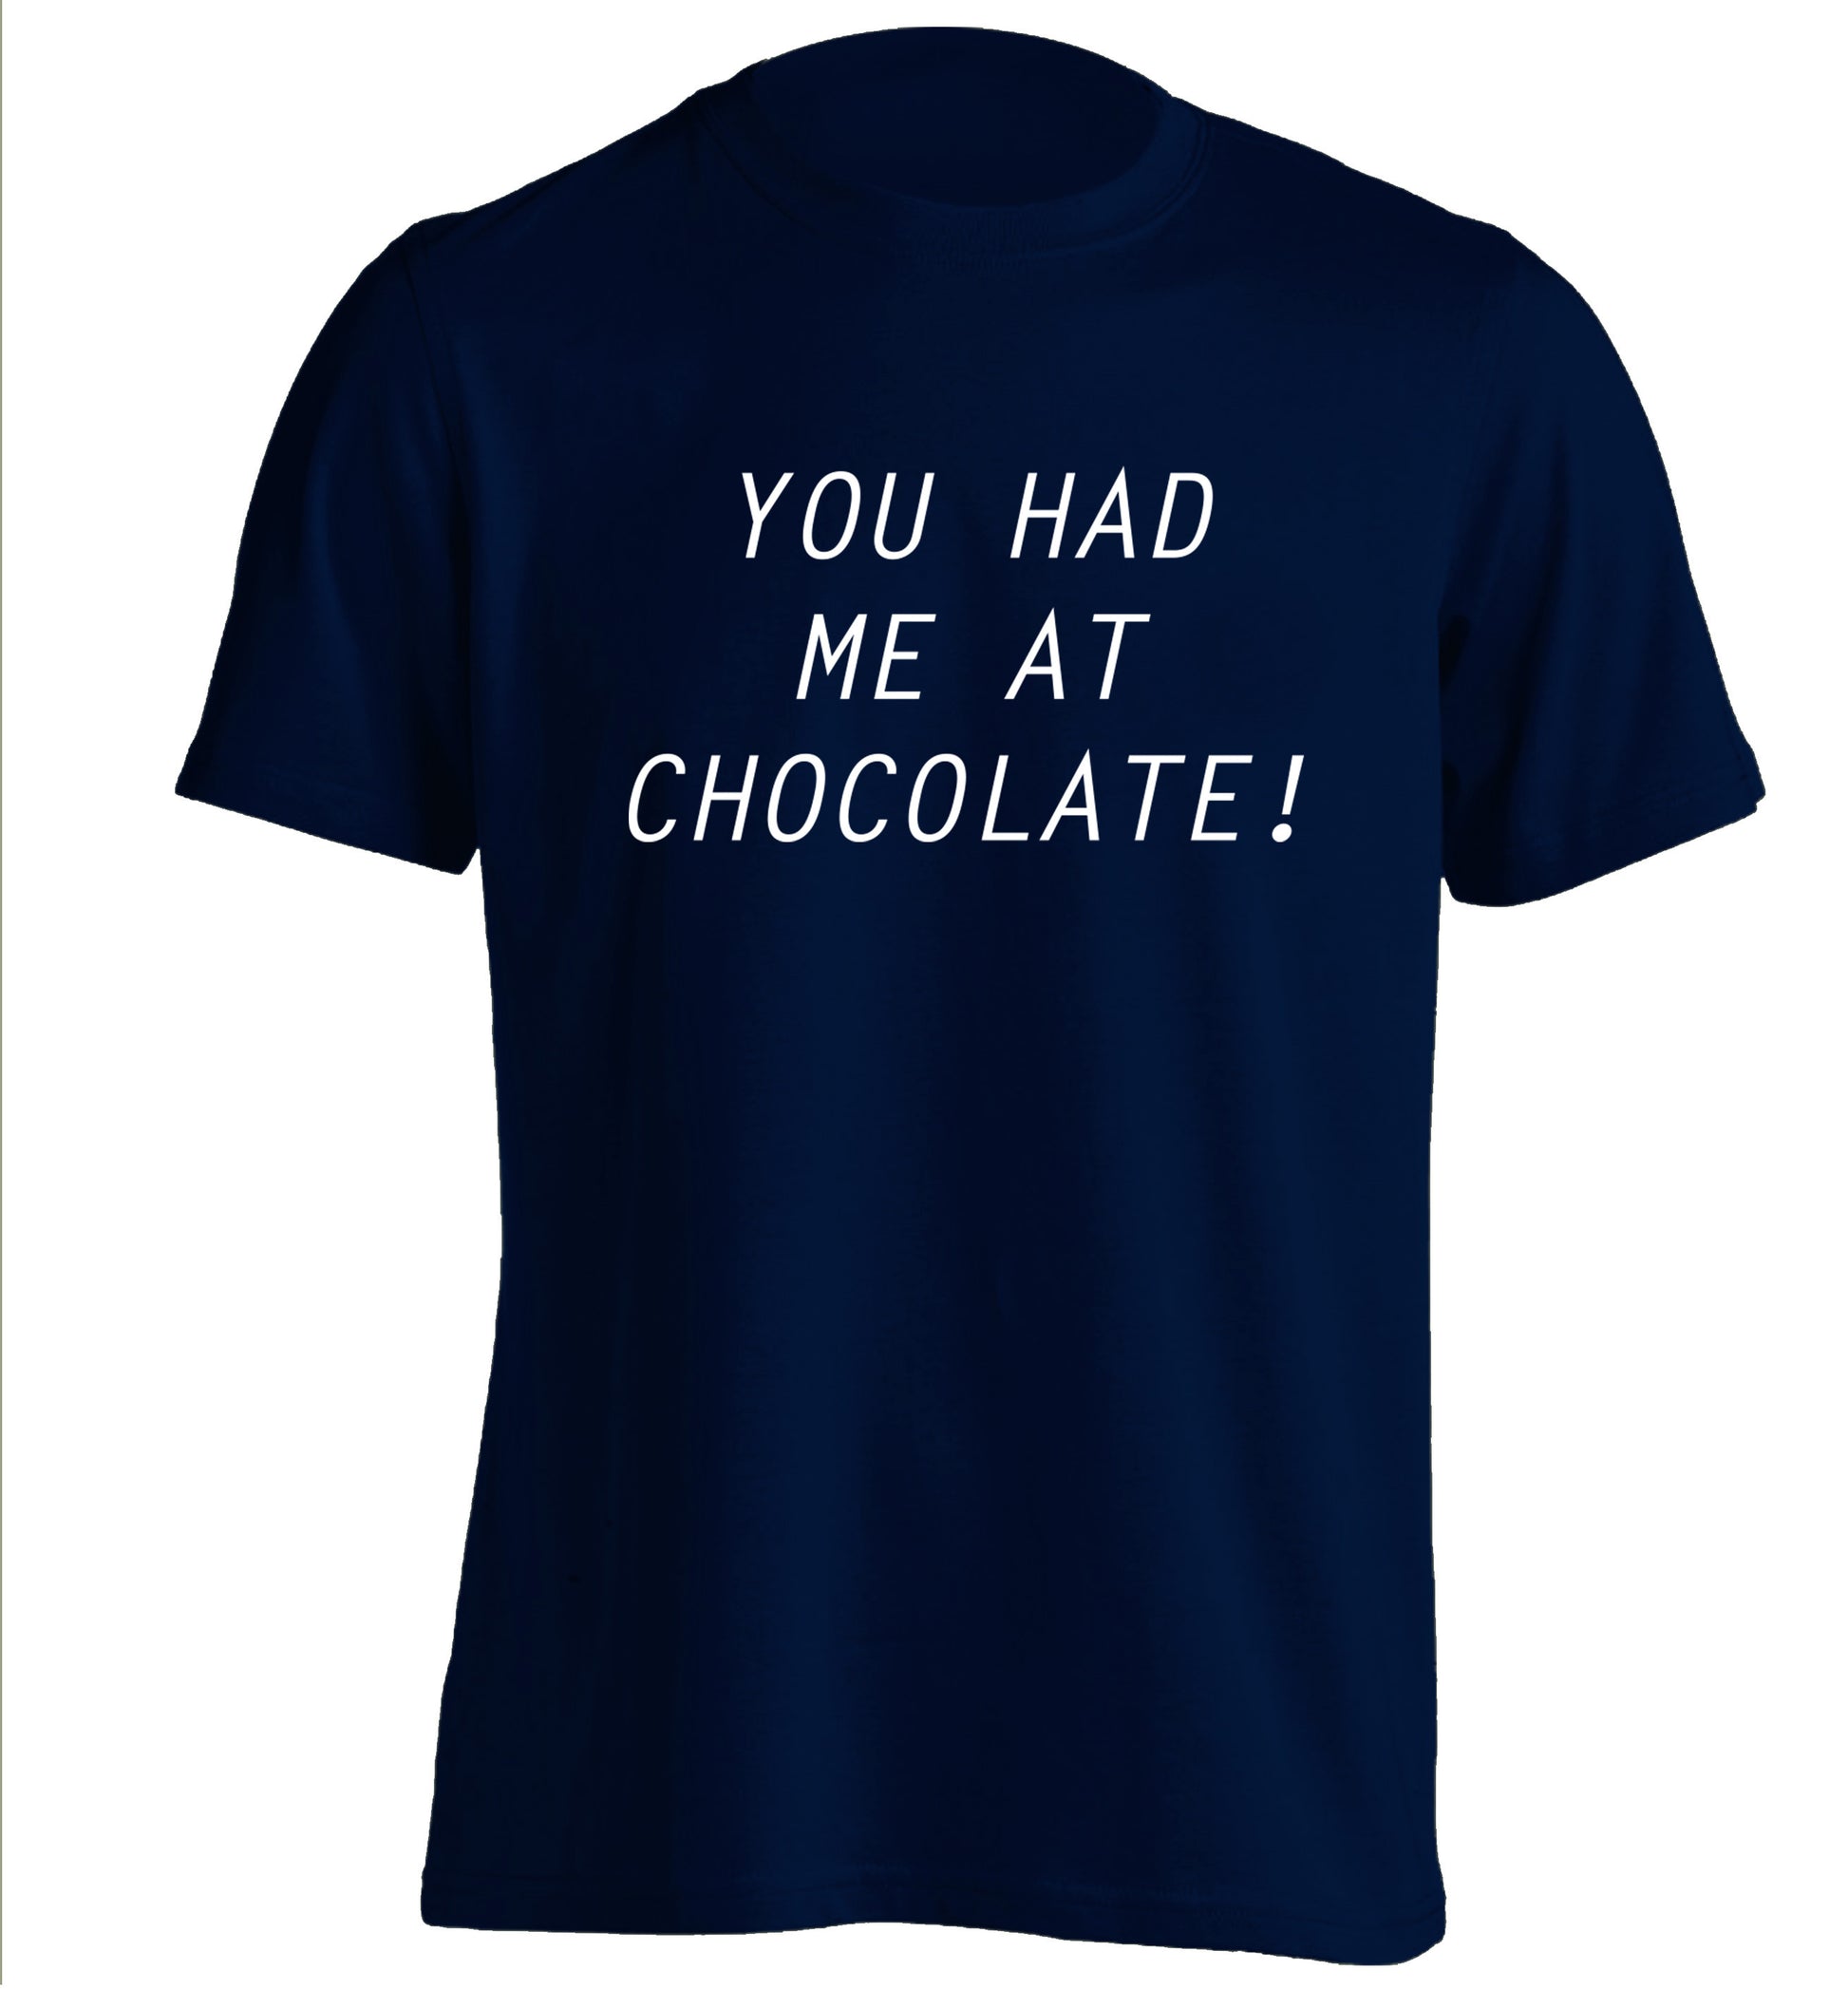 You had me at chocolate adults unisex navy Tshirt 2XL